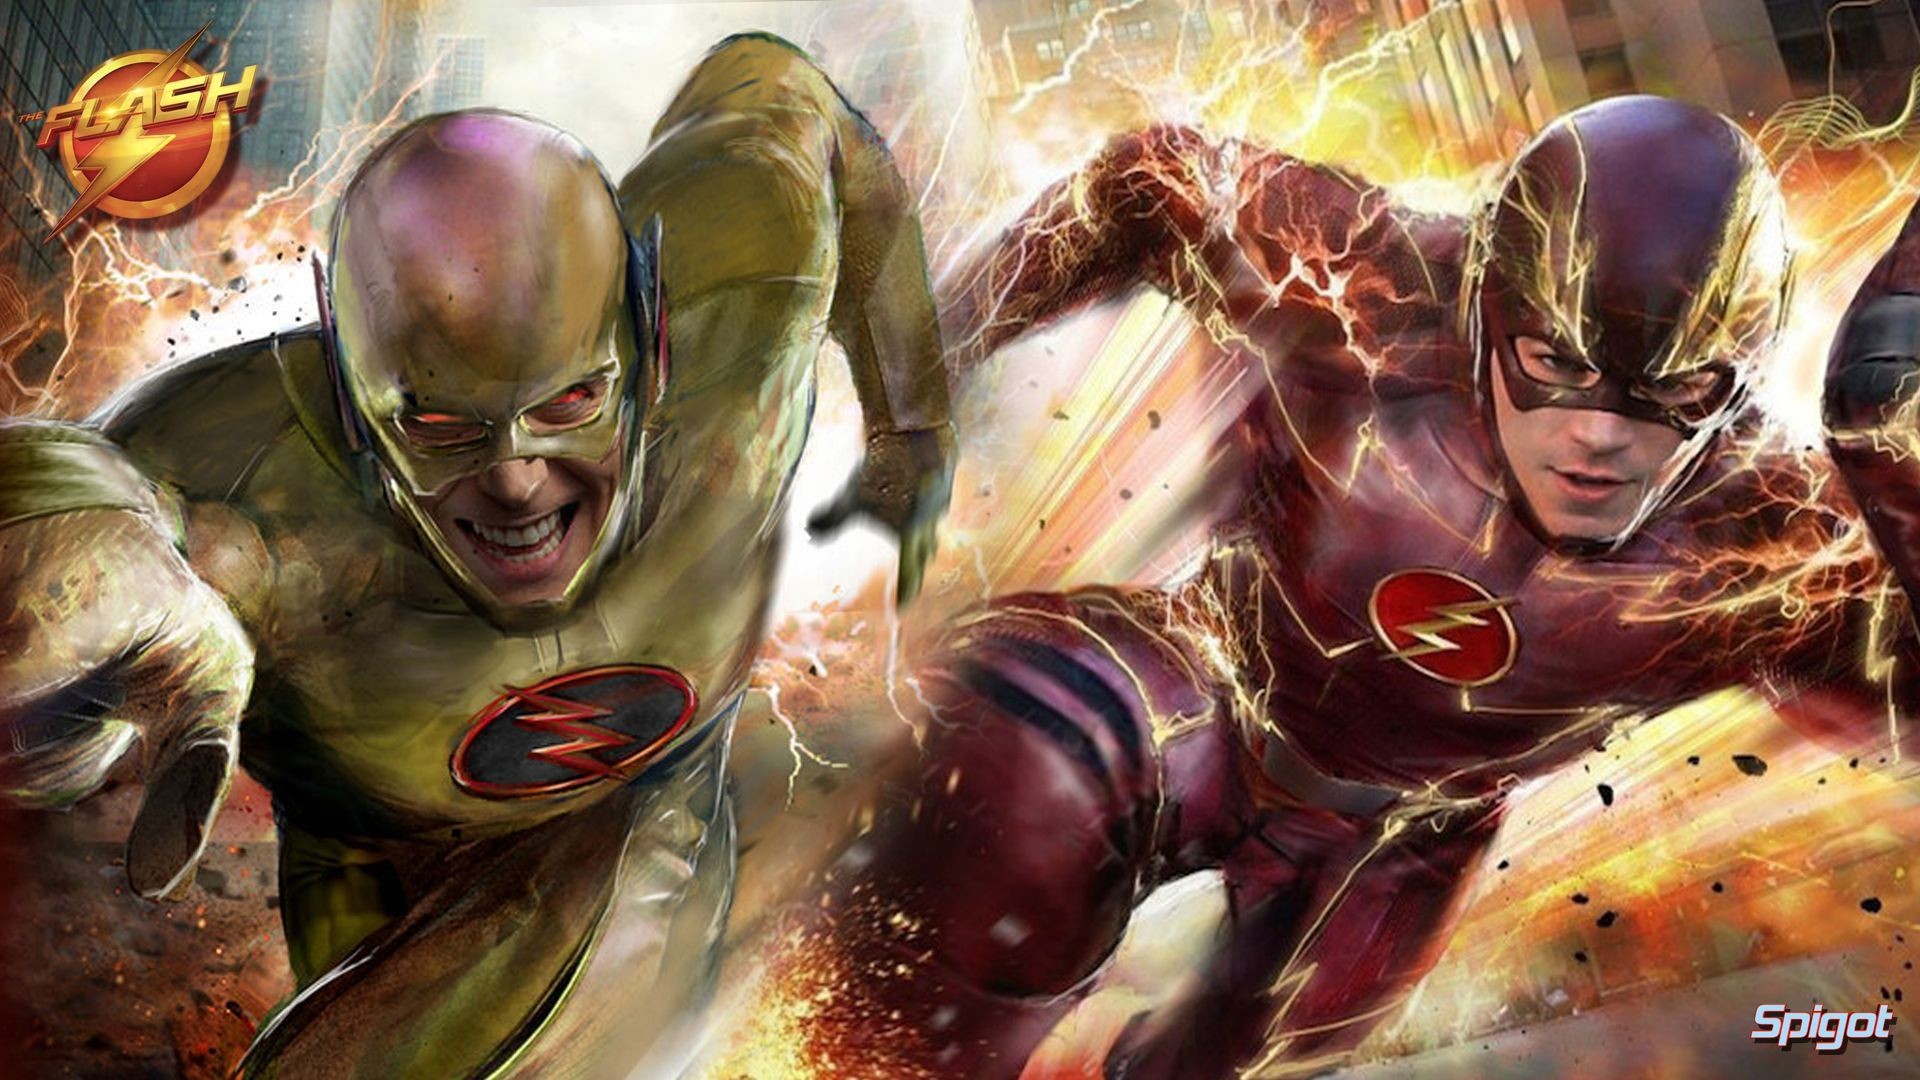 1920x1080 Image The Flash. High Definition The Flash Wallpaper ...